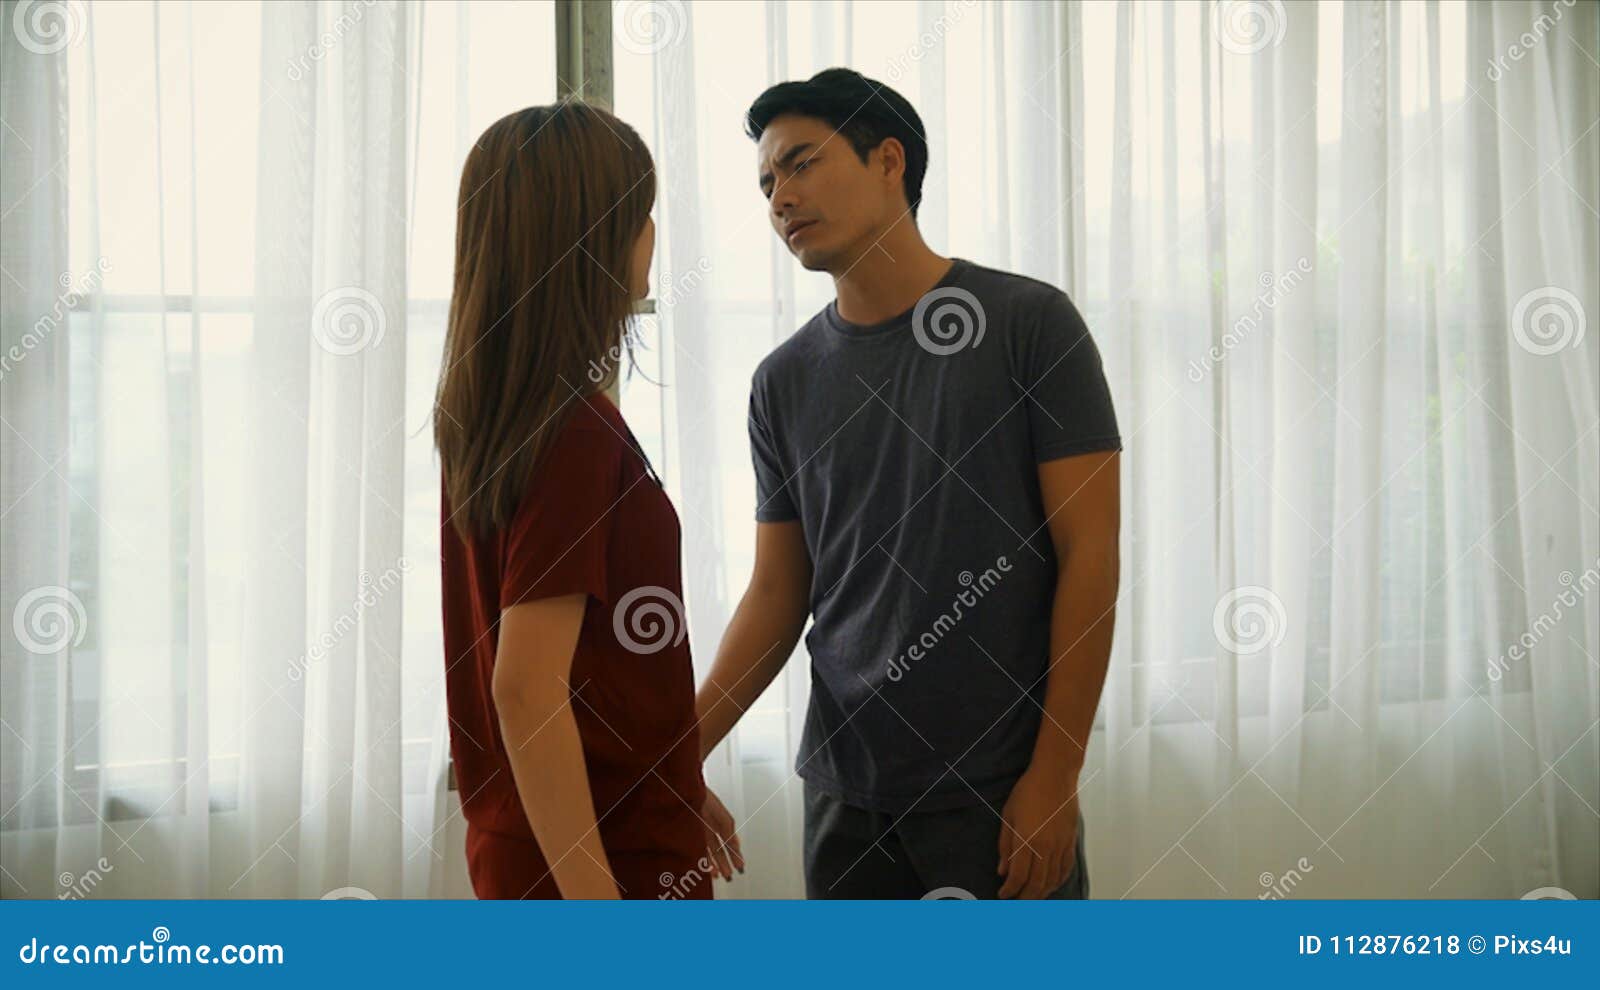 The Young Married Couples are Quarrelling Stock Photo picture picture image